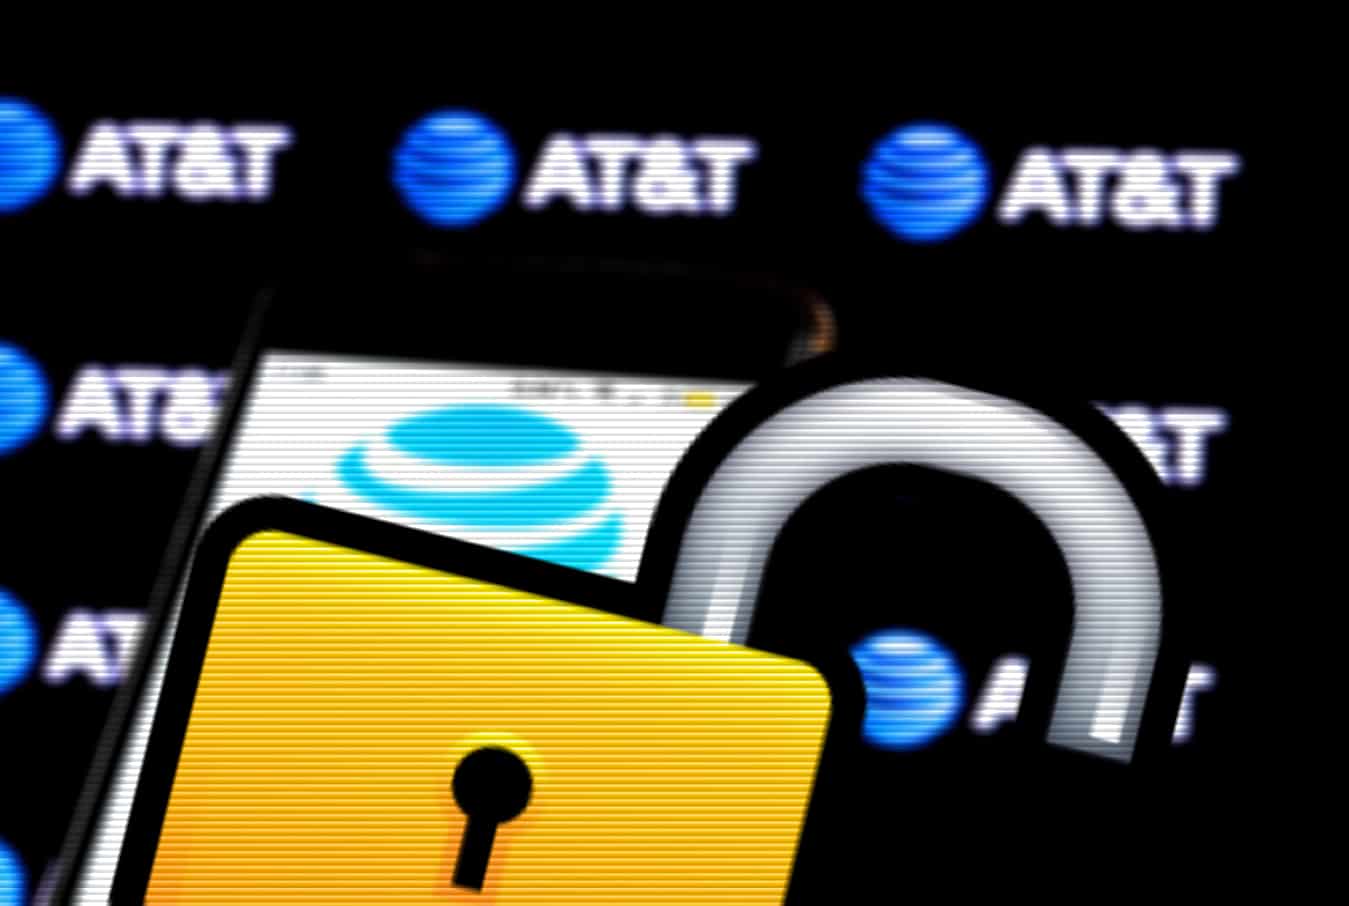 12 years jail for man who unlocked phones, defrauded AT&T of $200m